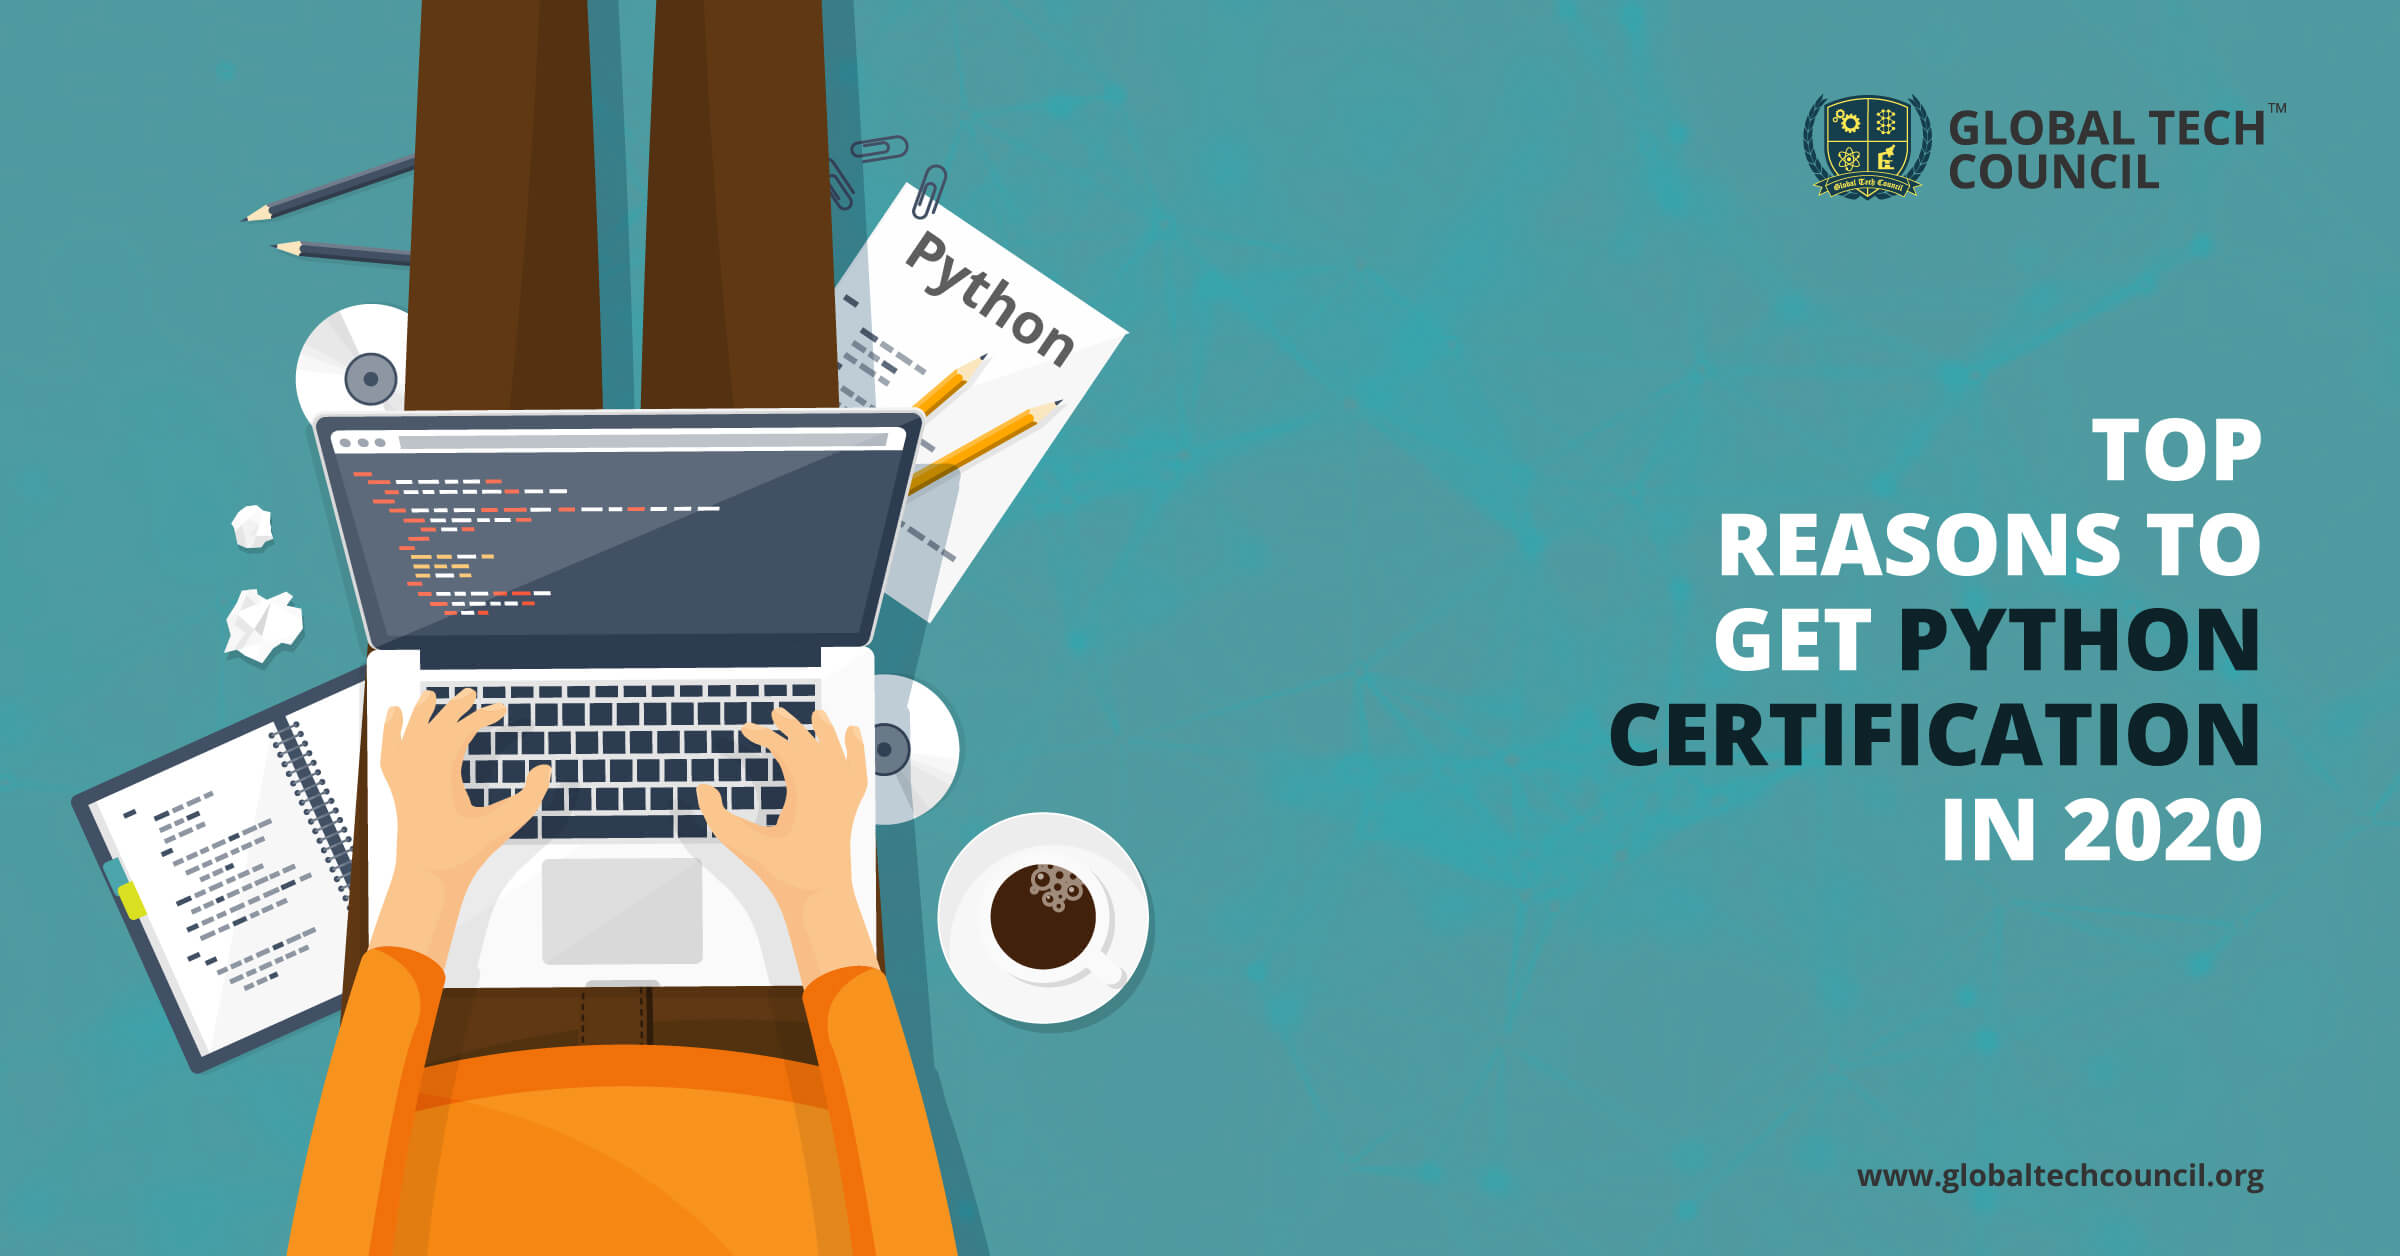 Top-Reasons-to-Get-Python-Certification-in-2020